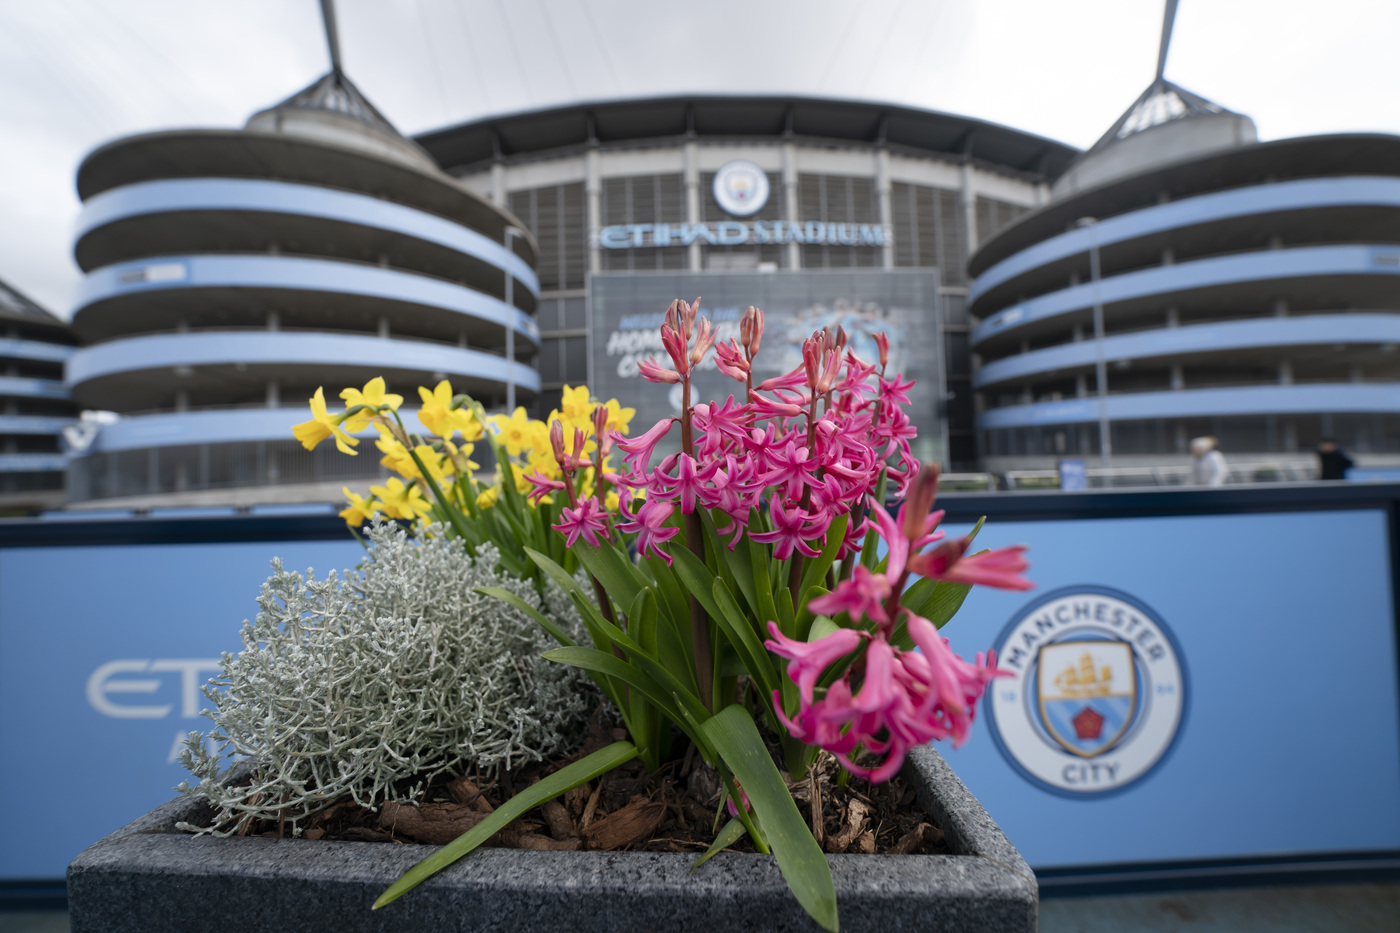 Spring flowers are seen outside the Etihad Stadium where Manchester City was due to play Burnley in an English Premier League soccer match Saturday March 14, 2020, after all English soccer games were cancelled due to the spread of the COVID-19 Coronavirus. For most people, the new COVID-19 coronavirus causes only mild or moderate symptoms, but for some it can cause more severe illness. (AP Photo/Jon Super)